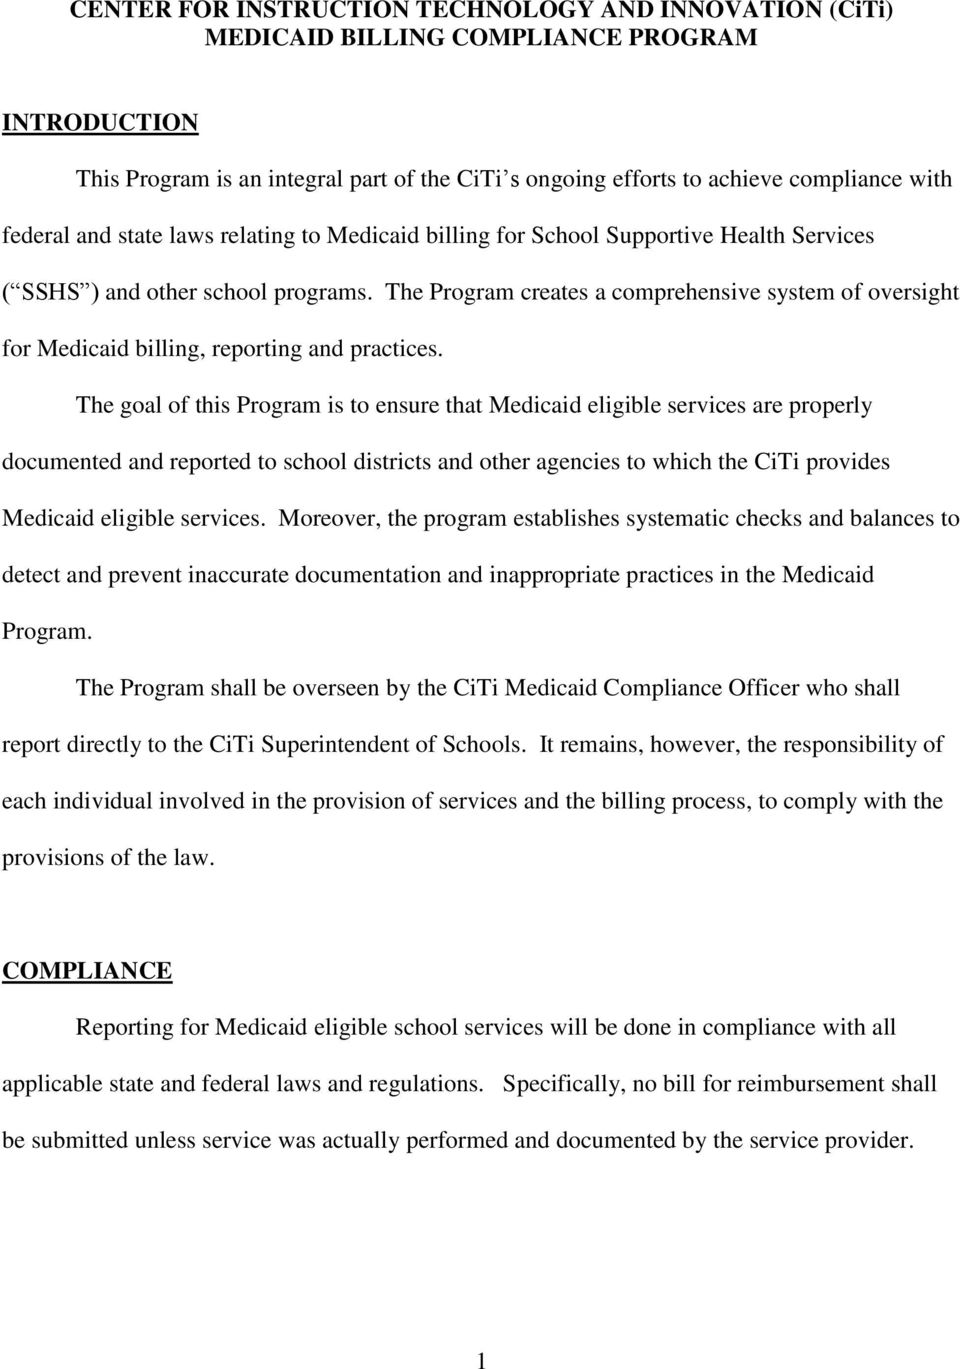 The Program creates a comprehensive system of oversight for Medicaid billing, reporting and practices.